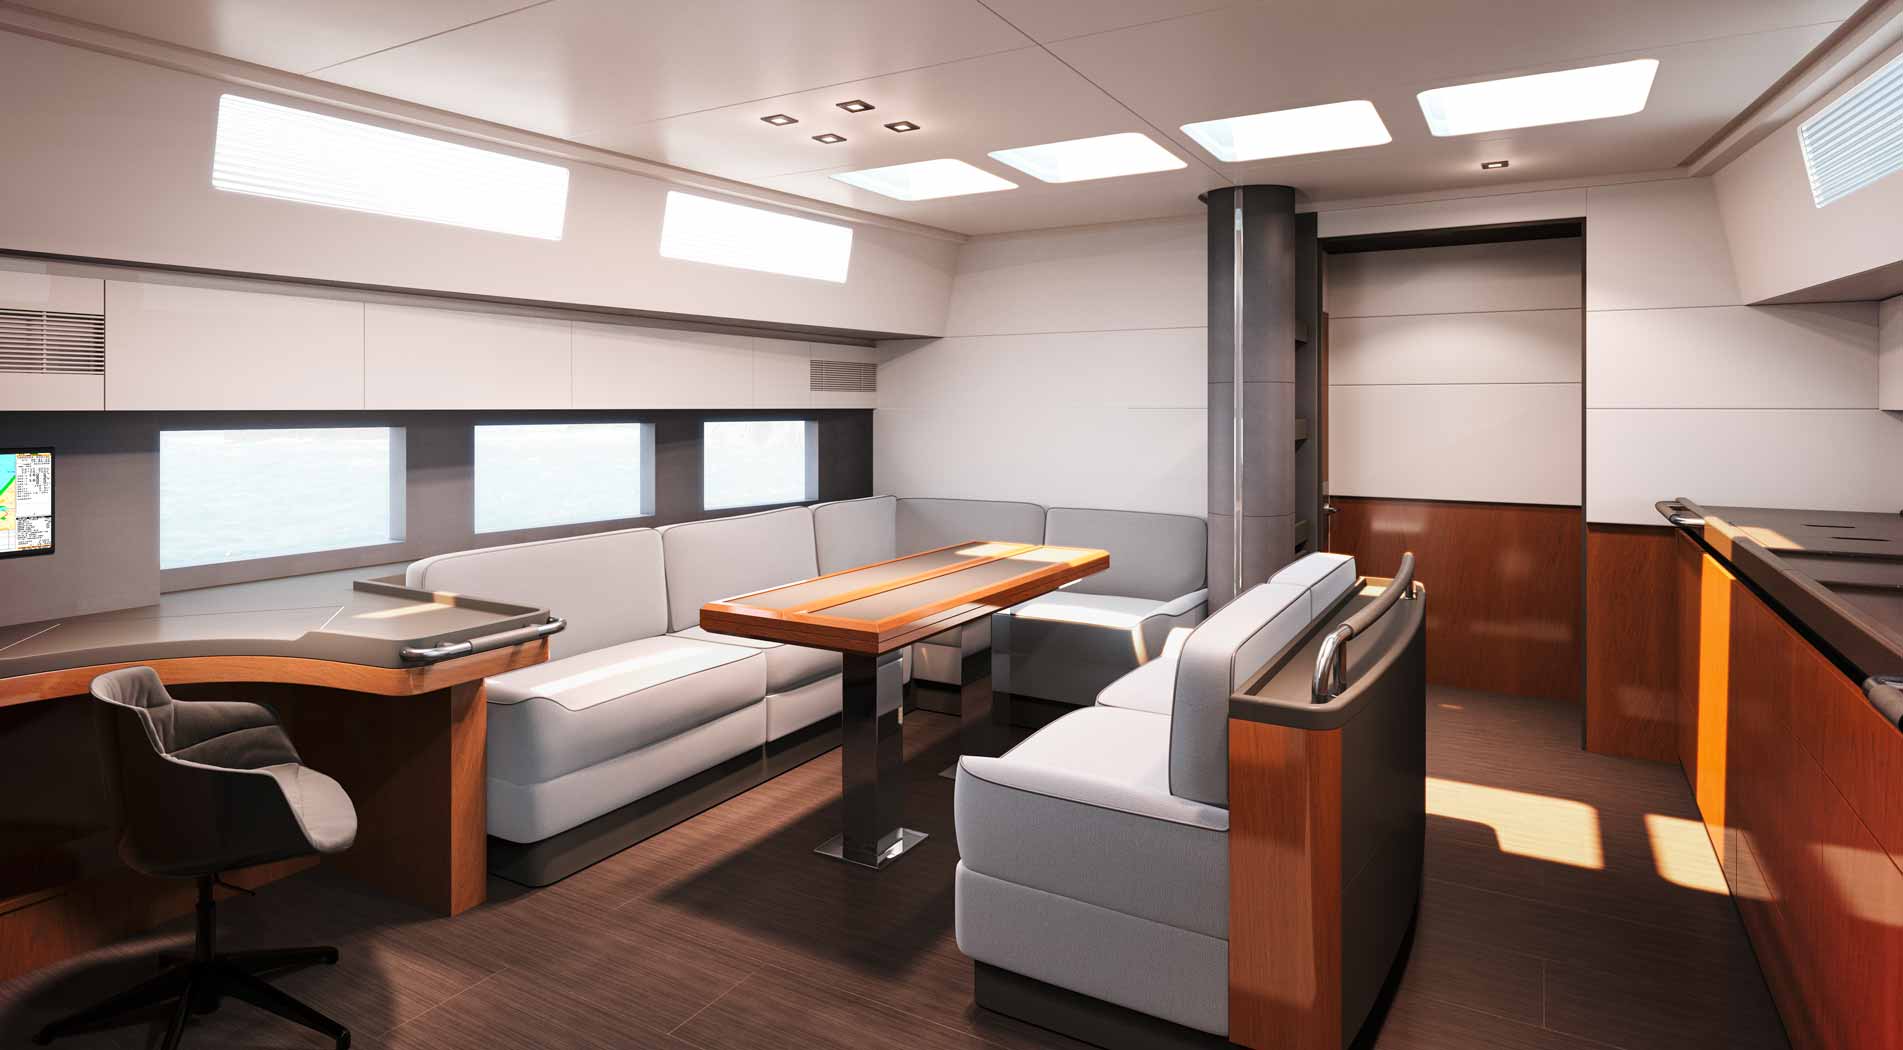 New Beneteau Oceanis Yacht 62 available at BJ Marine Beneteau Dealer for Ireland and Wales. Interior photo